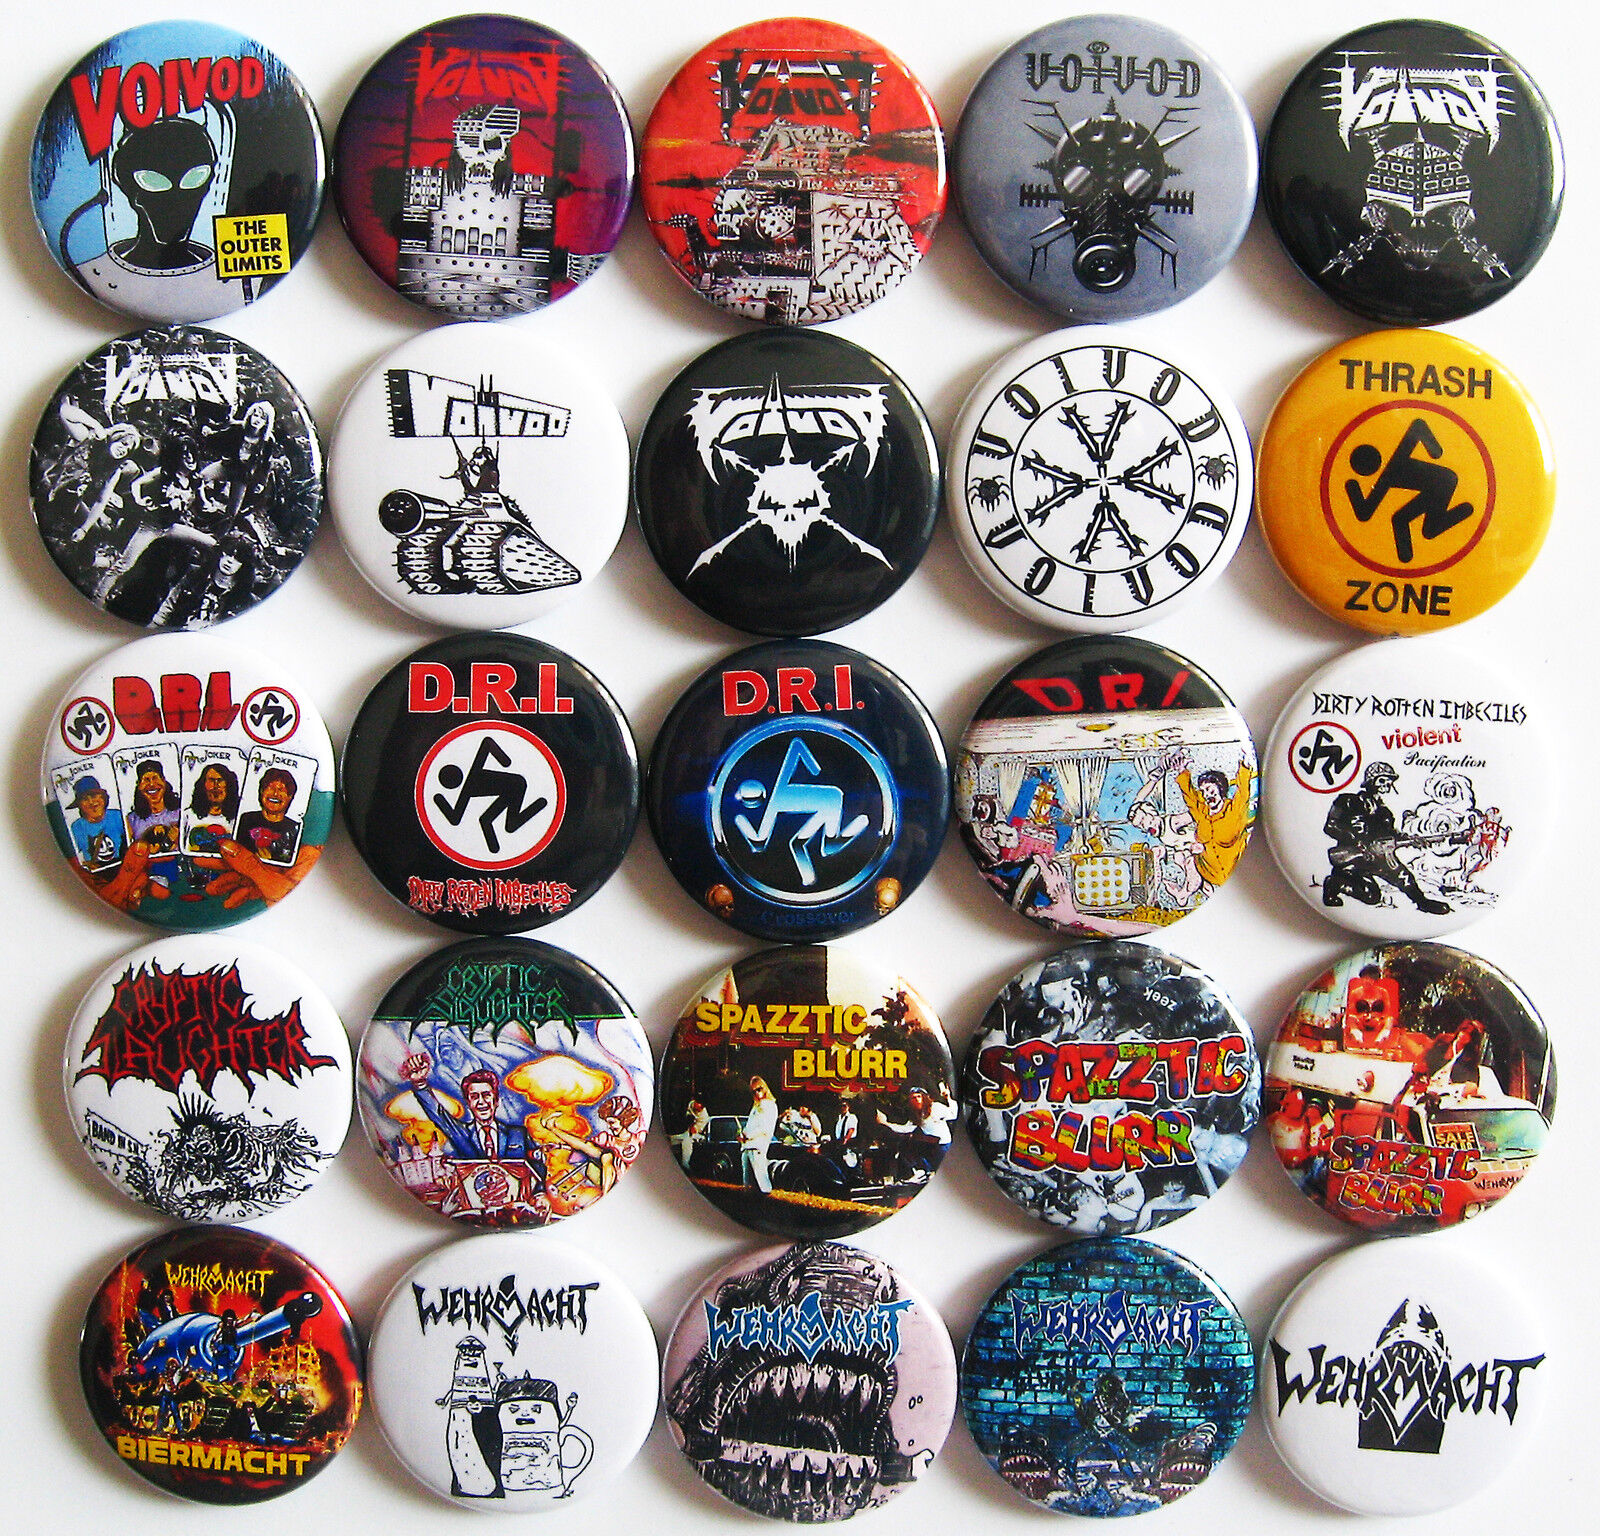 WEHRMACHT VOIVOD CRYPTIC SLAUGHTER D.R.I. Button Badges Pins Crossover Thrash 25